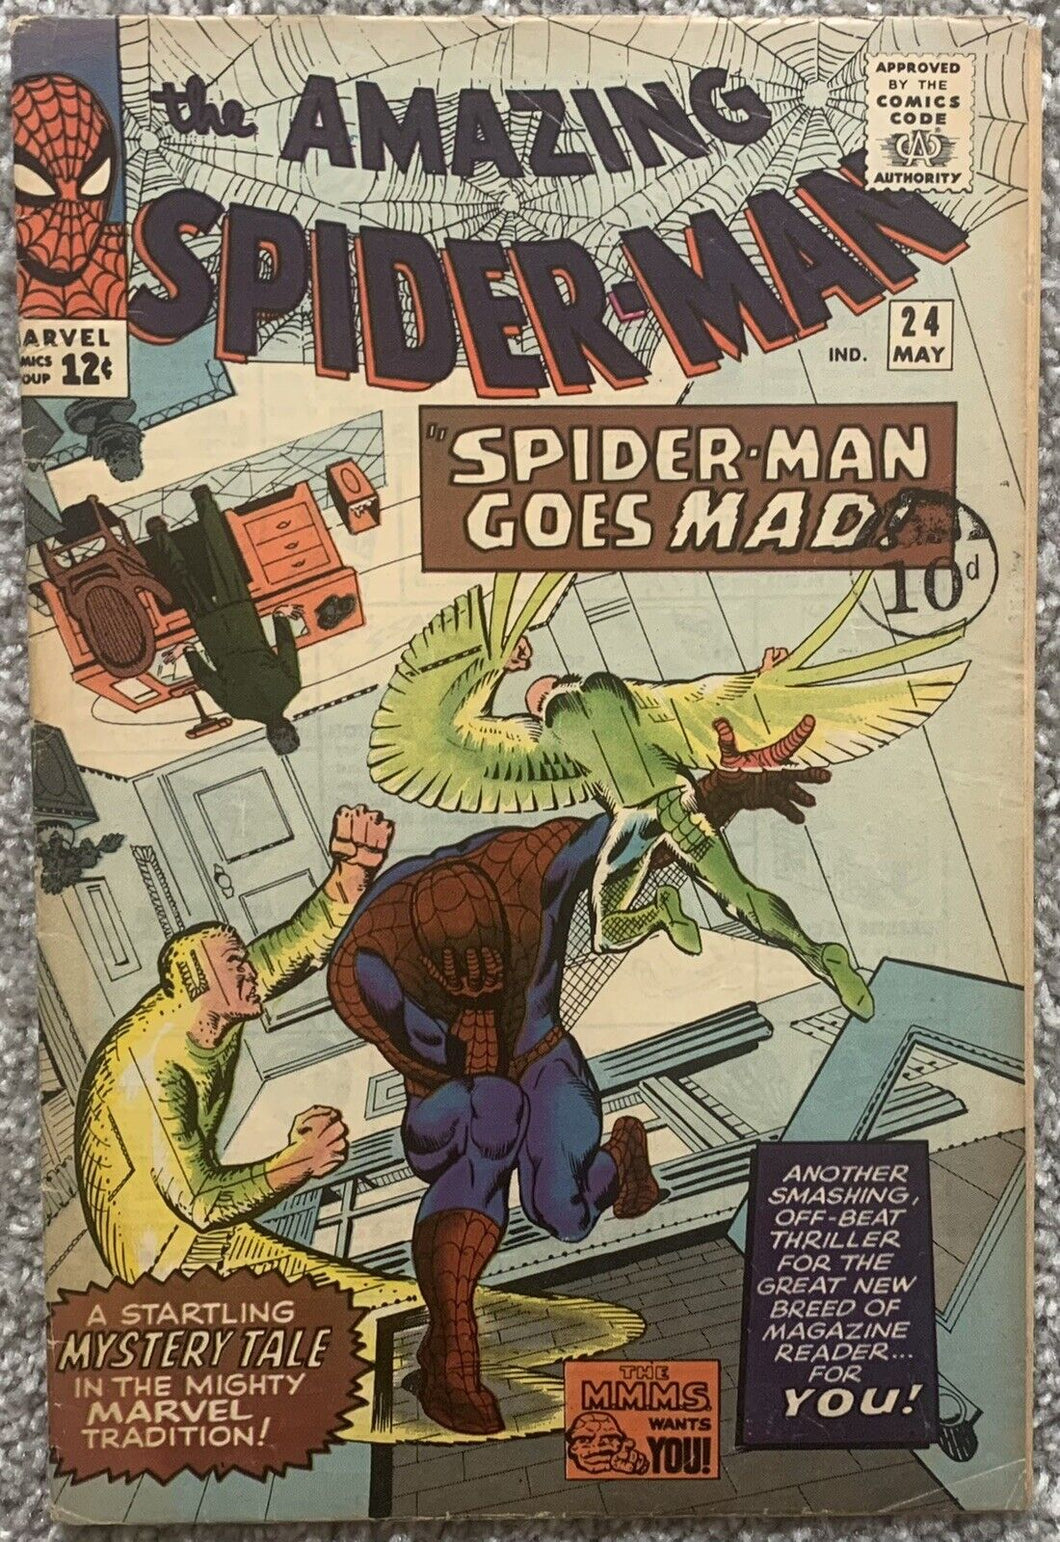 AMAZING SPIDER-MAN #24 (MARVEL,1965) Mysterio appearance.